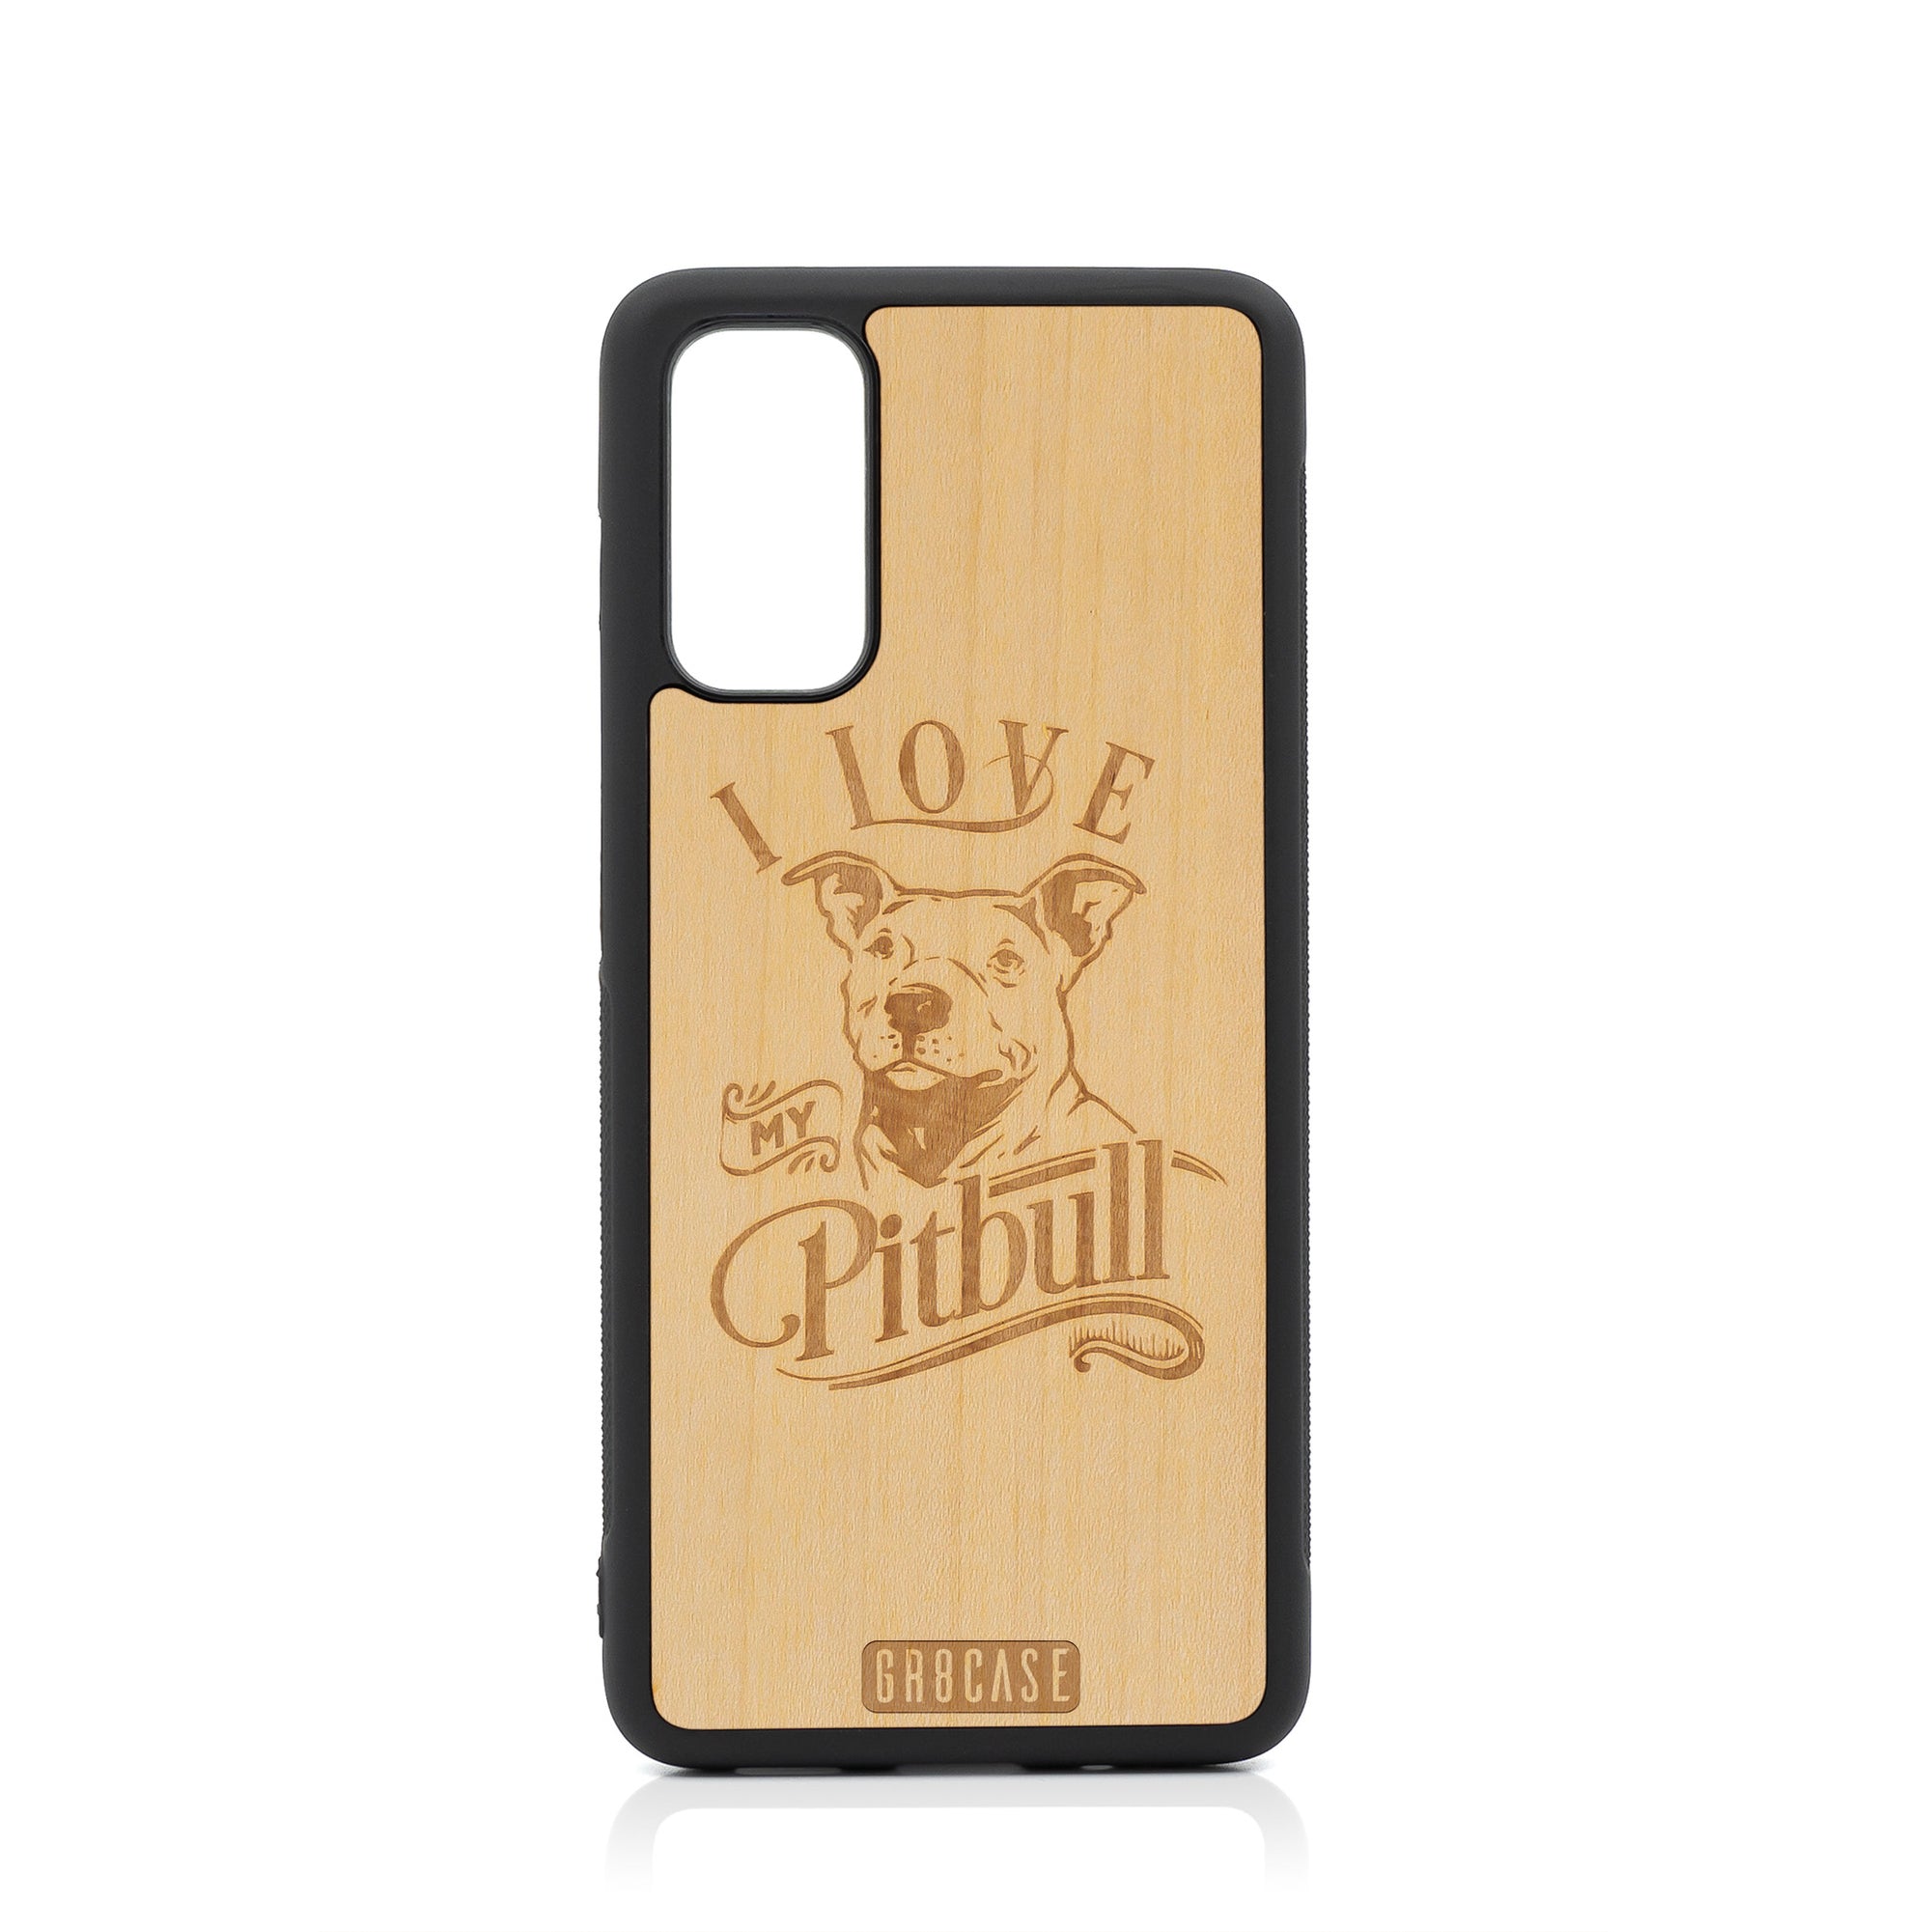 I Love My Pitbull Design Wood Case For Samsung Galaxy S20 by GR8CASE